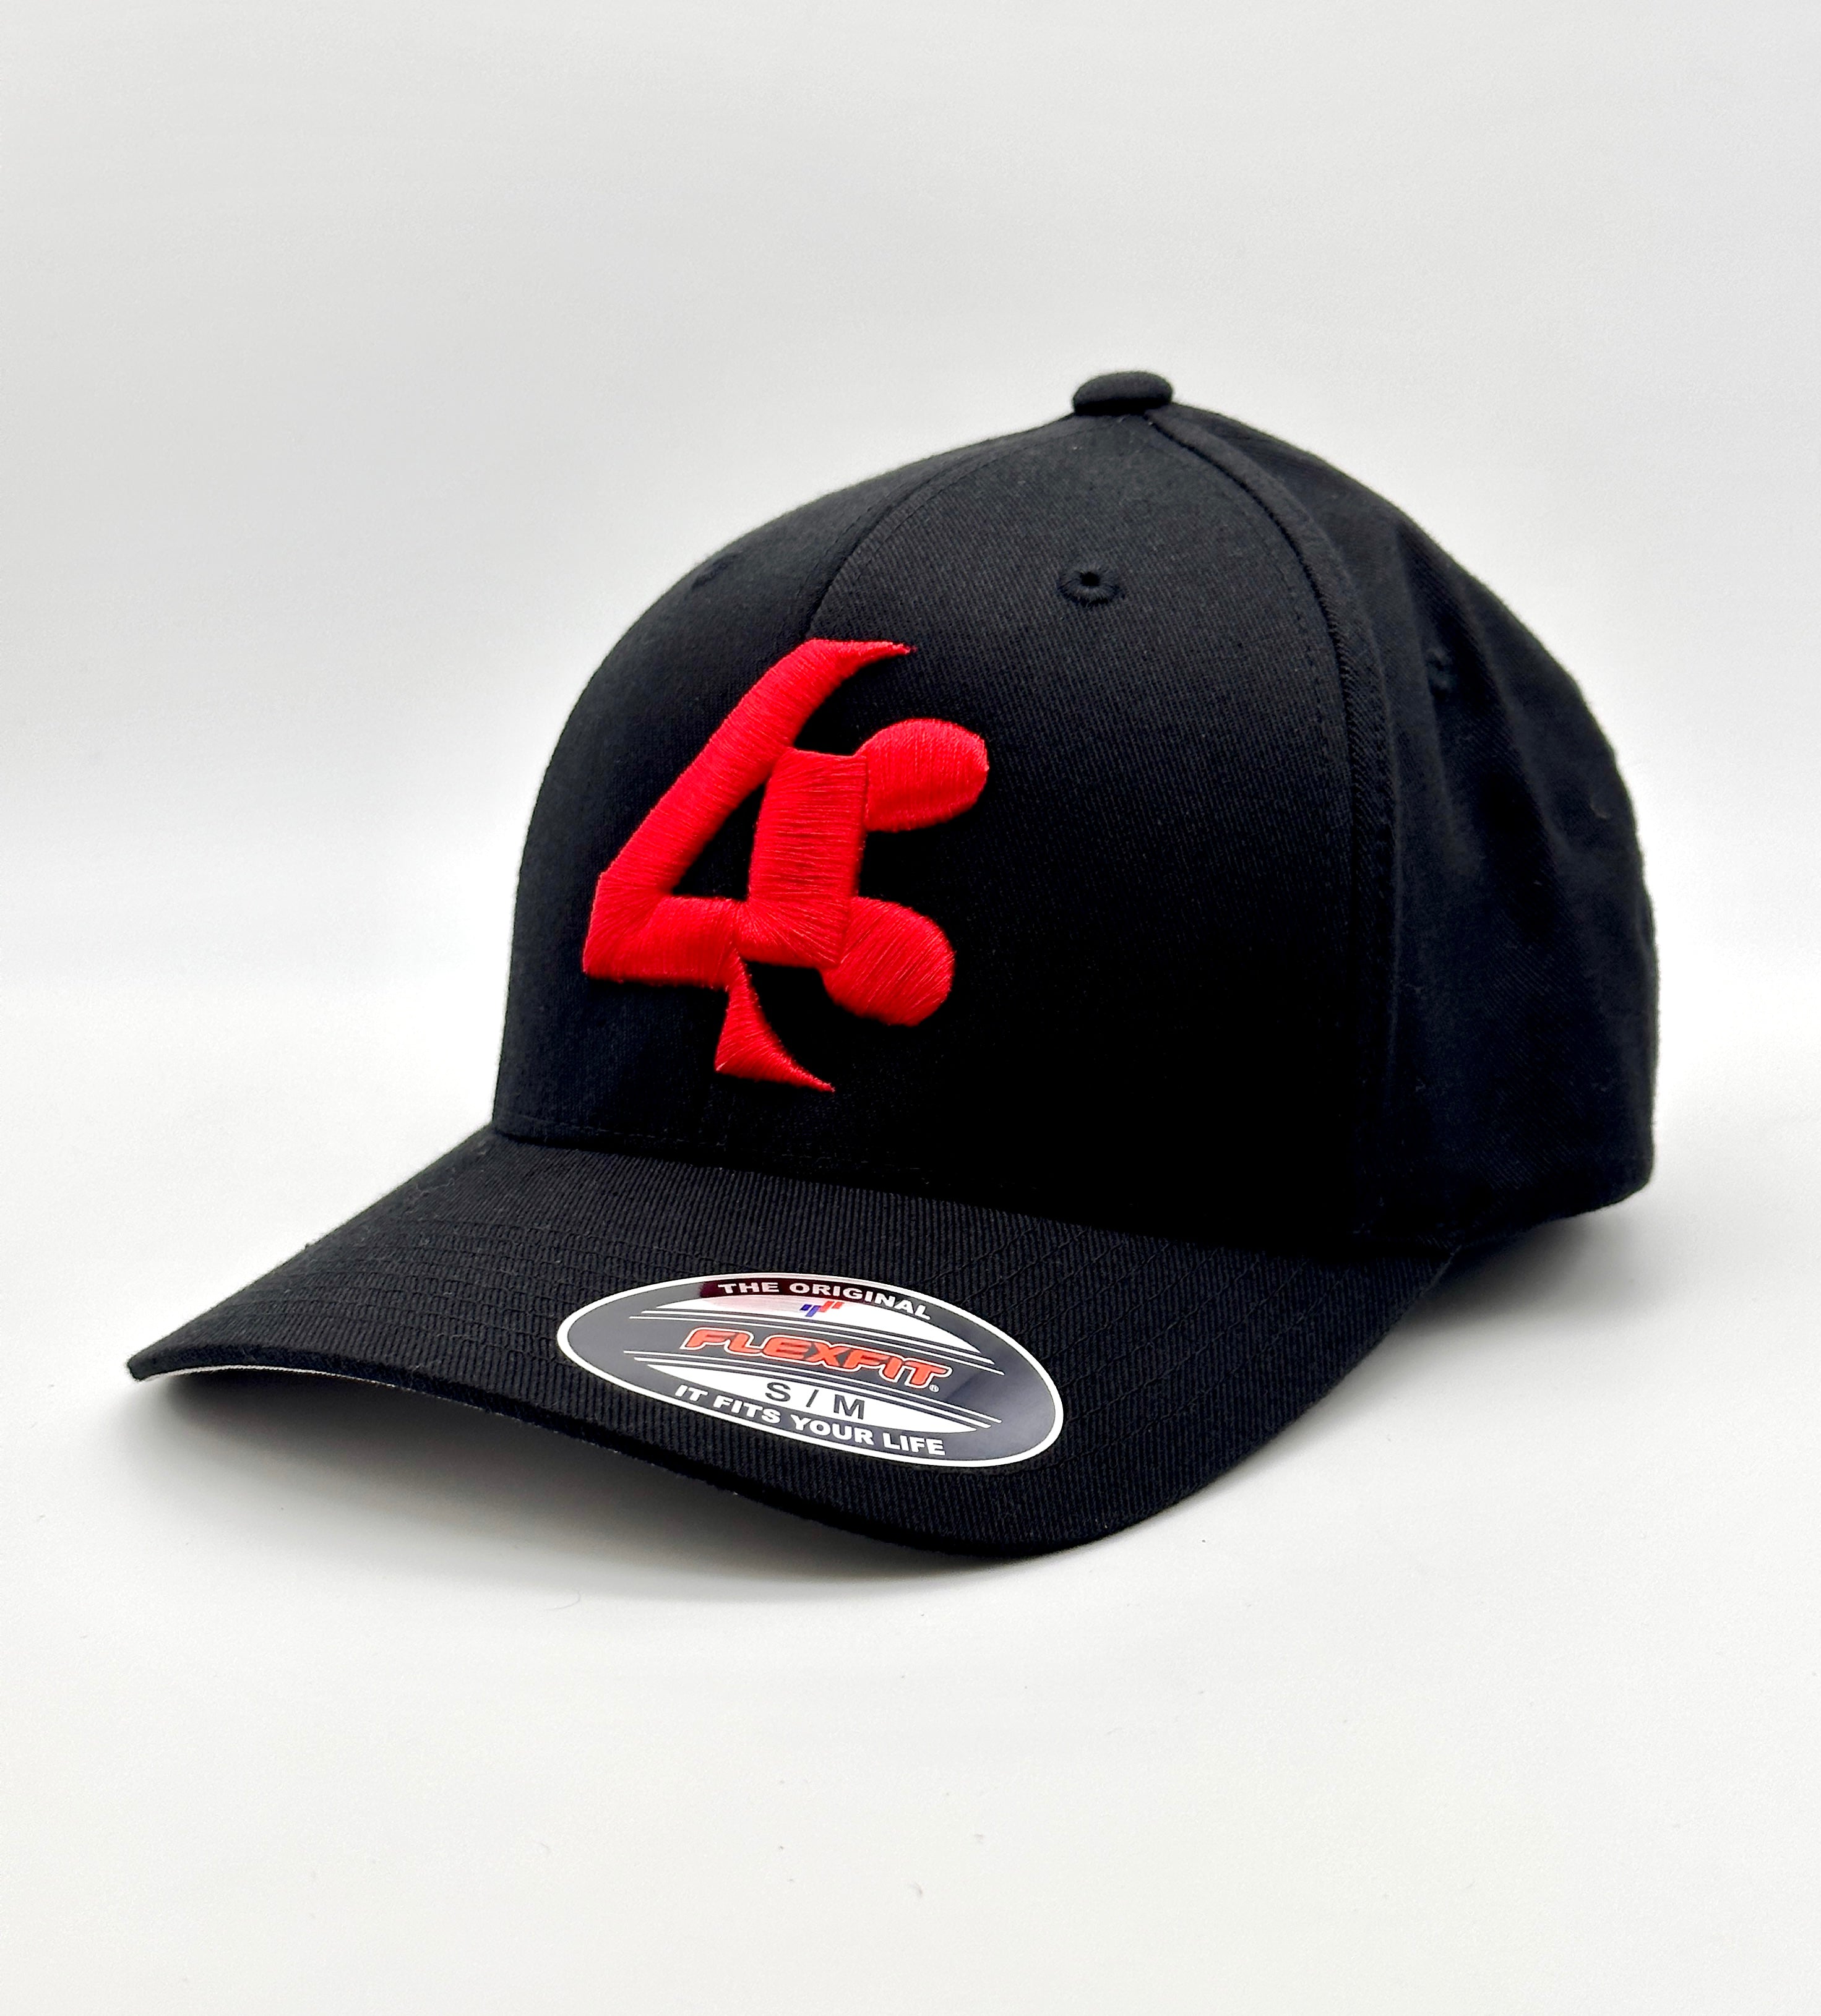 43 Black with red emblem Fitted Flexfit® – FortyThree™ USA